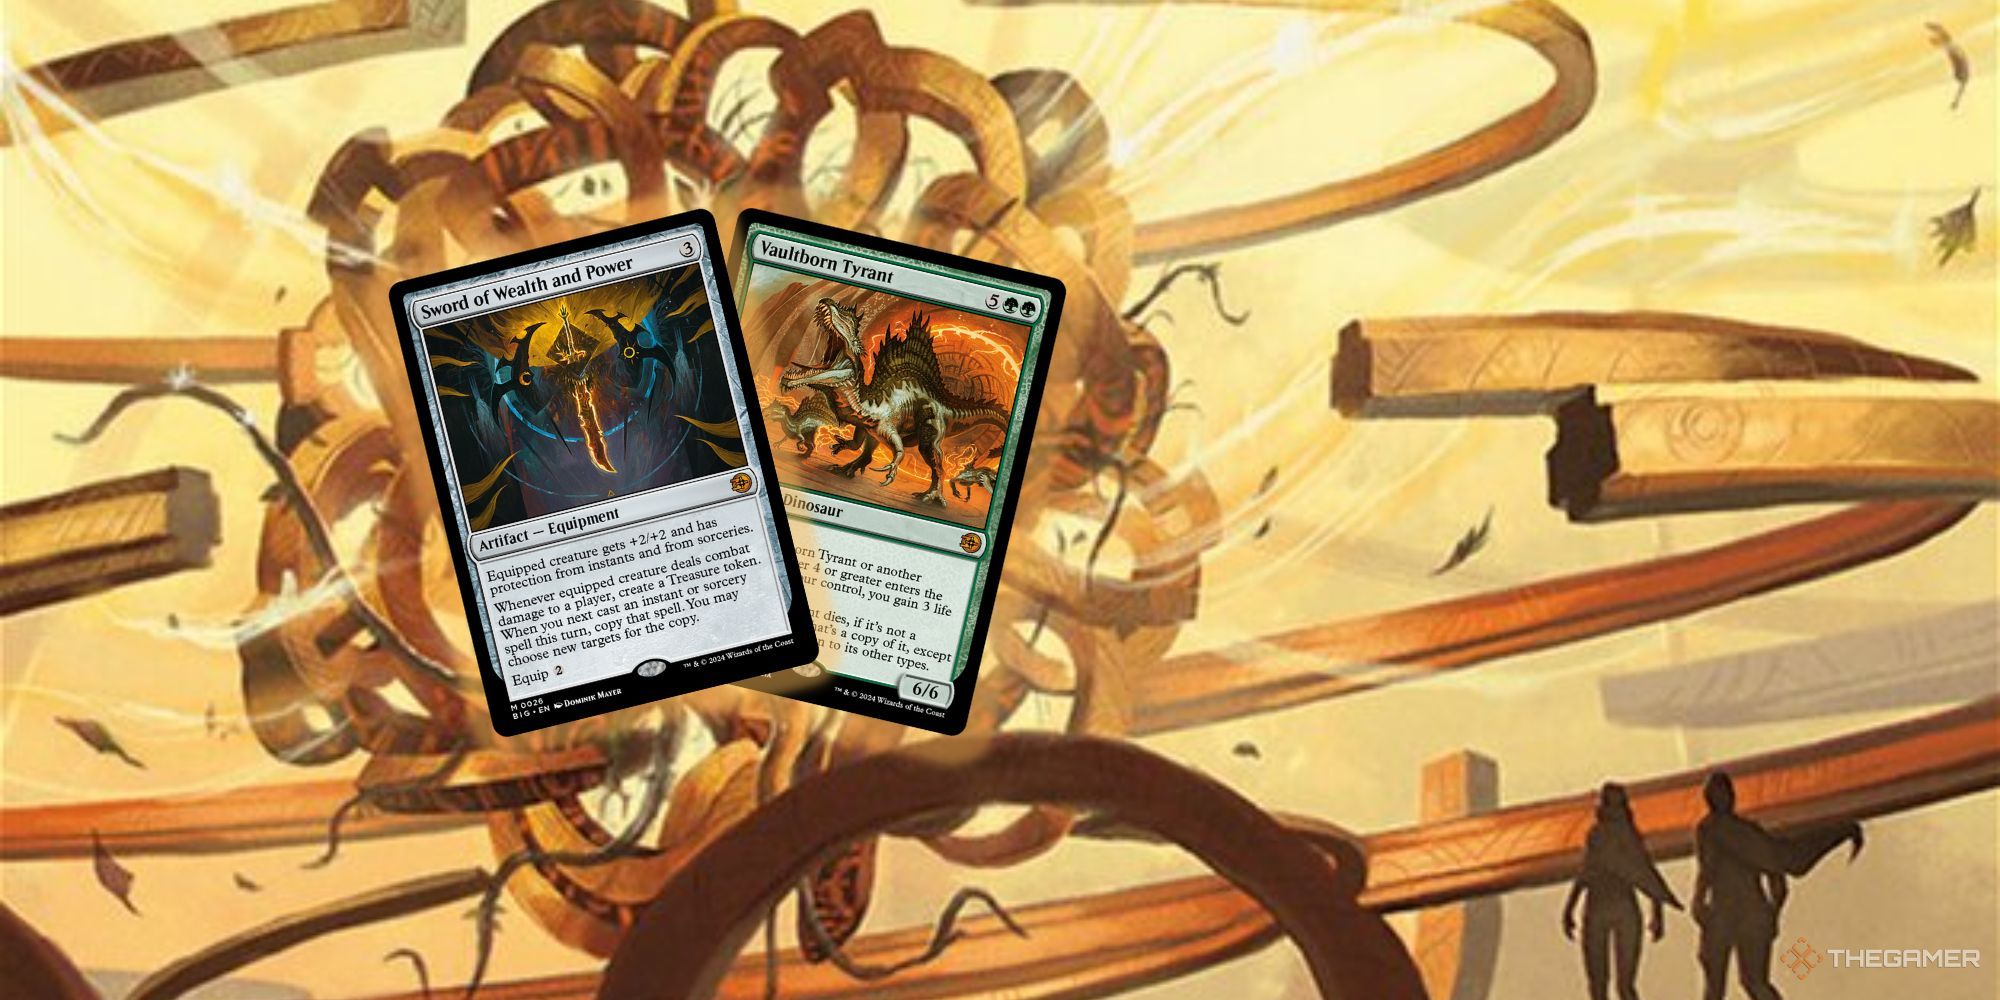 Magic: The Gathering card art for Collector's Cage + card images of Sword of Wealth and Power and Vaultborn Tyrant